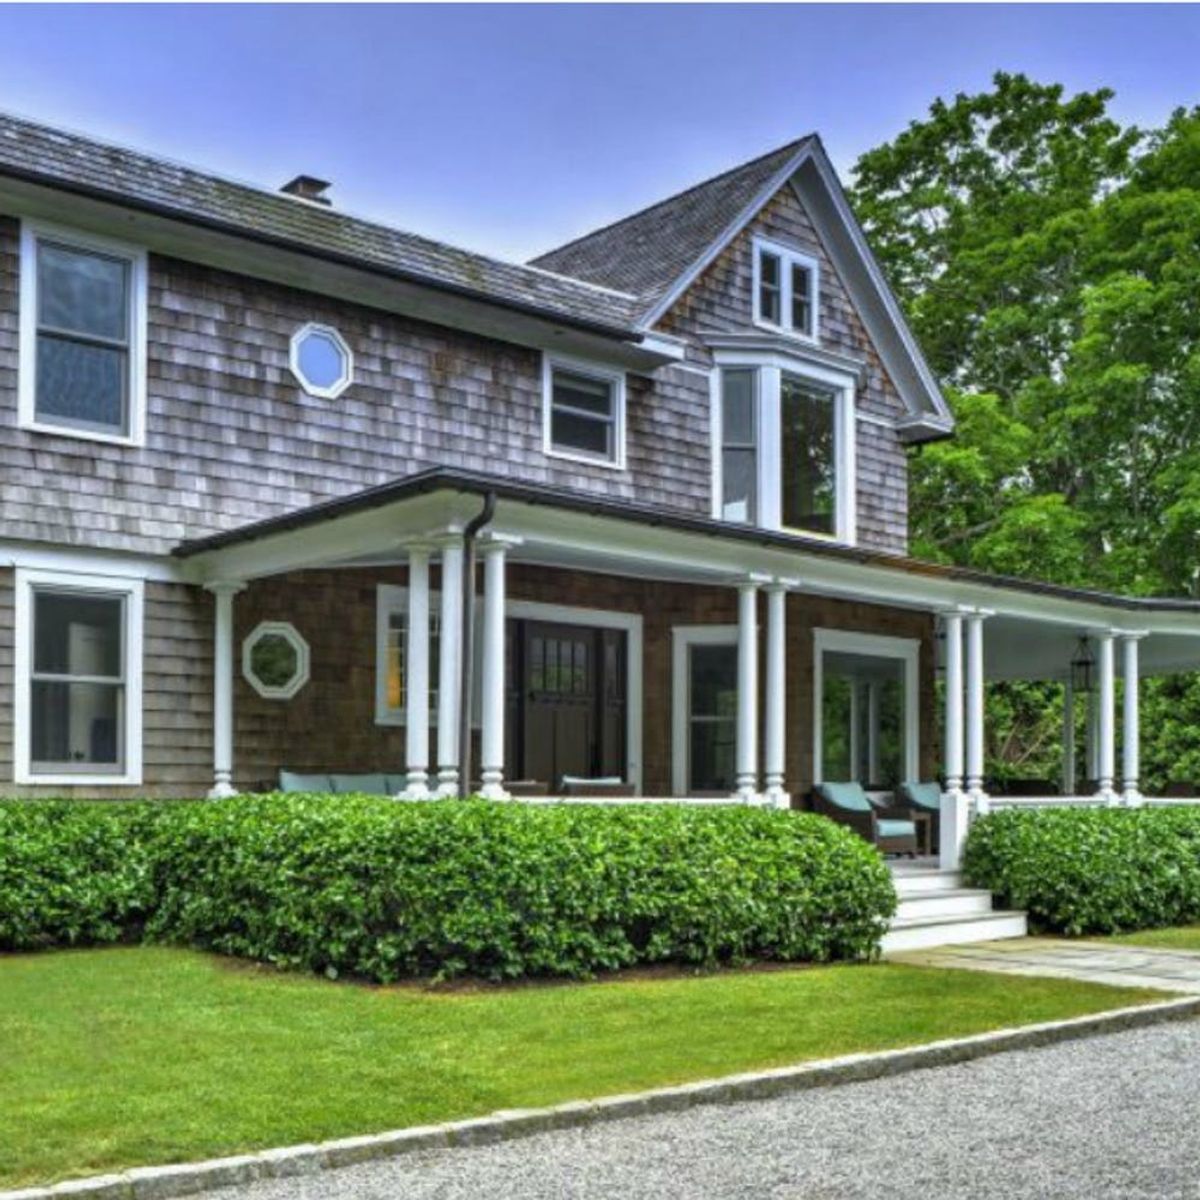 Bethenny Frankel’s New Hamptons Home Is a Must-See